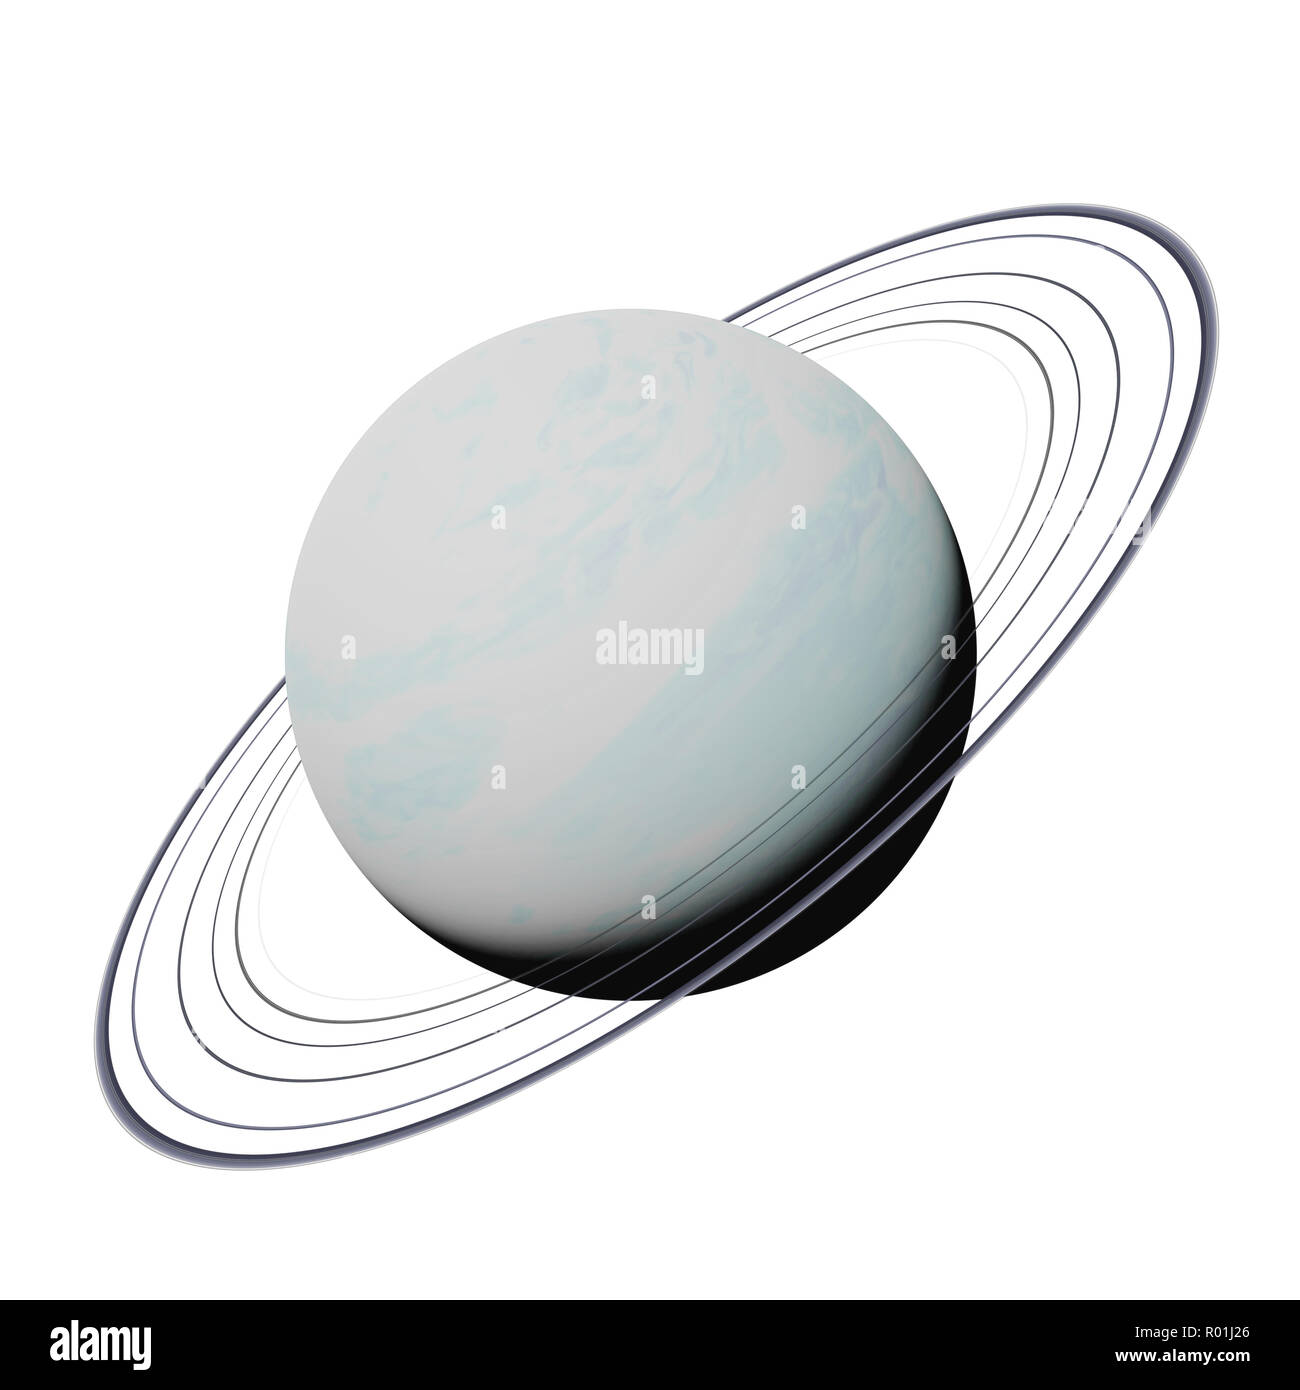 Uranus's Ring System and the Moons Ariel and Miranda | NAOJ: National  Astronomical Observatory of Japan - English